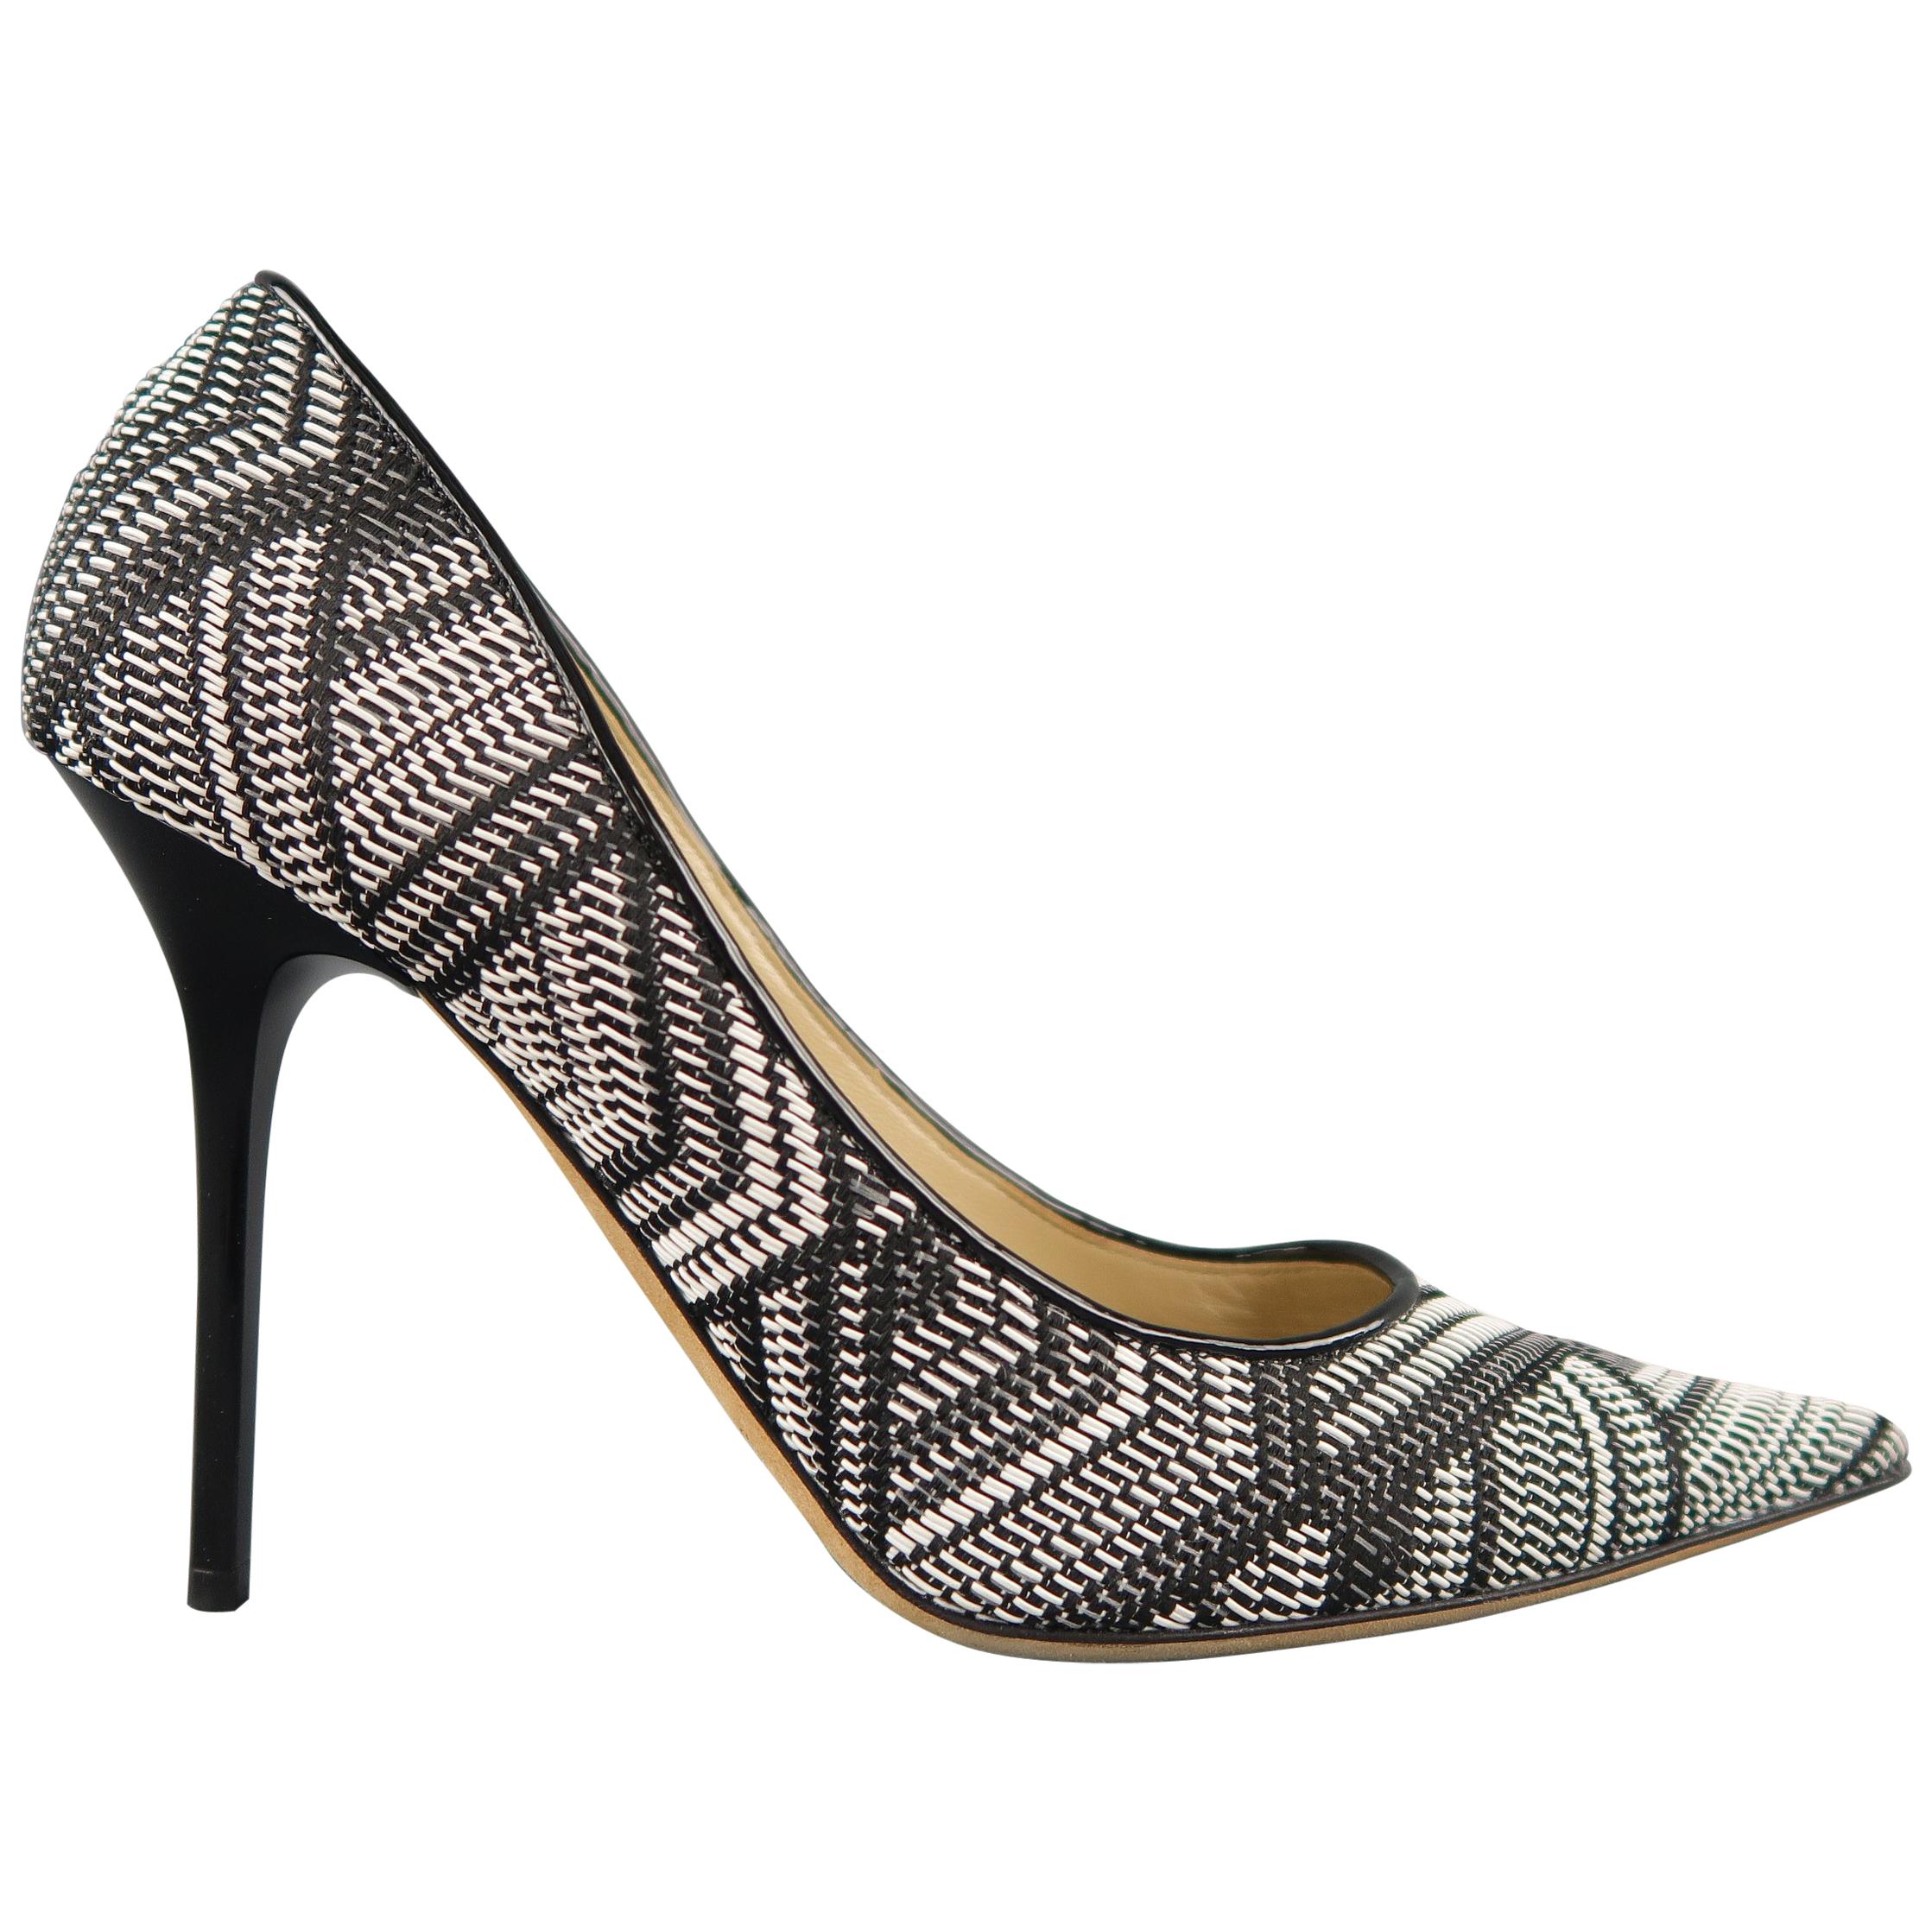 JIMMY CHOO Size 9 Black & White Woven Fabric ABEL Pointed Pumps